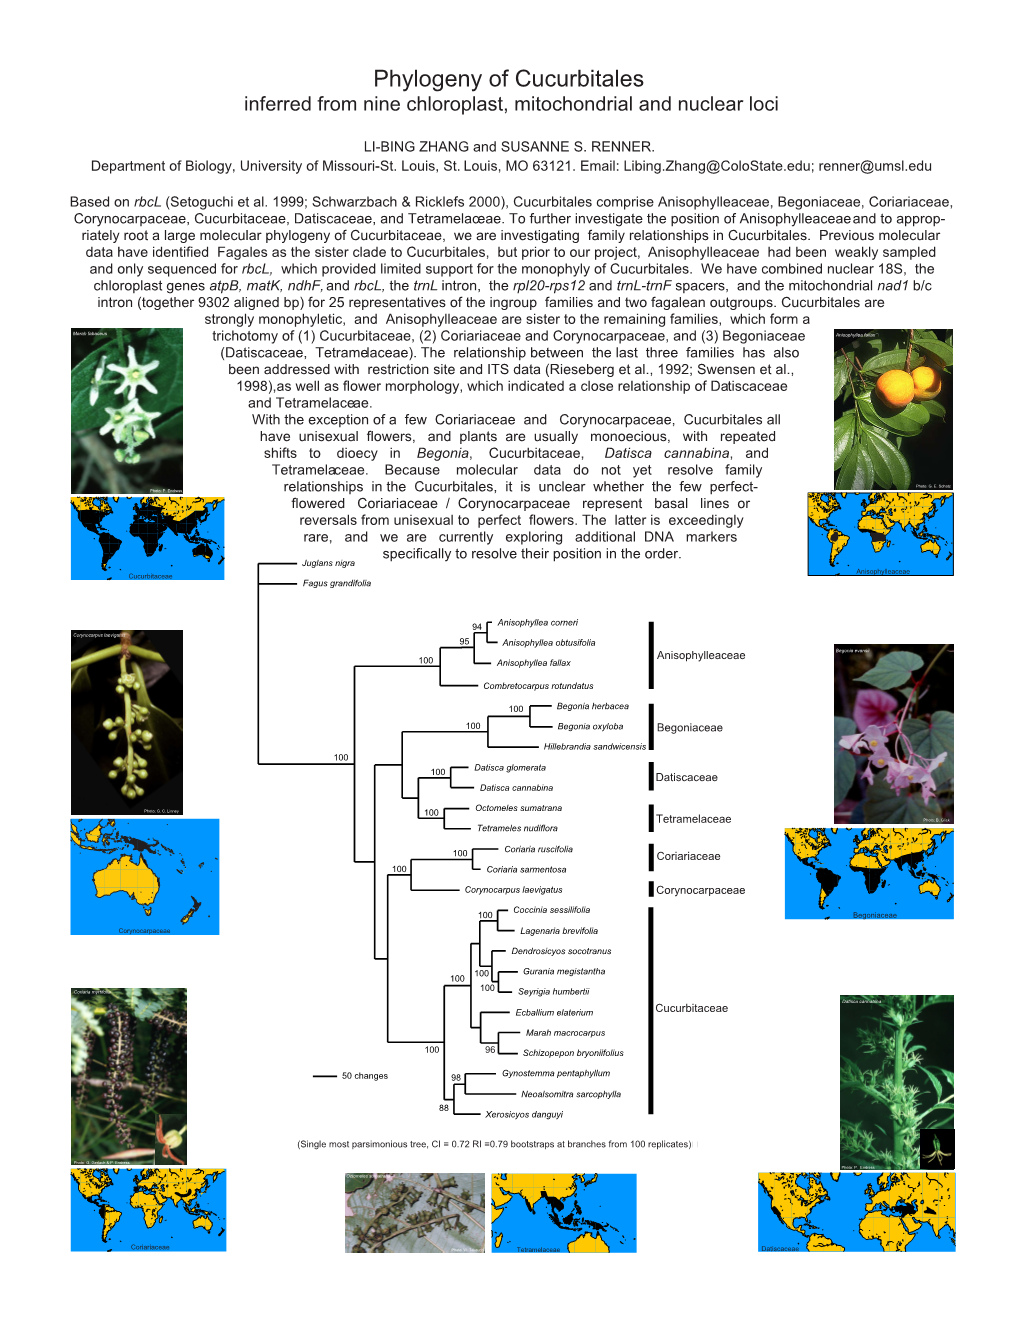 Phylogeny of Cucurbitales Inferred from Nine Chloroplast, Mitochondrial and Nuclear Loci